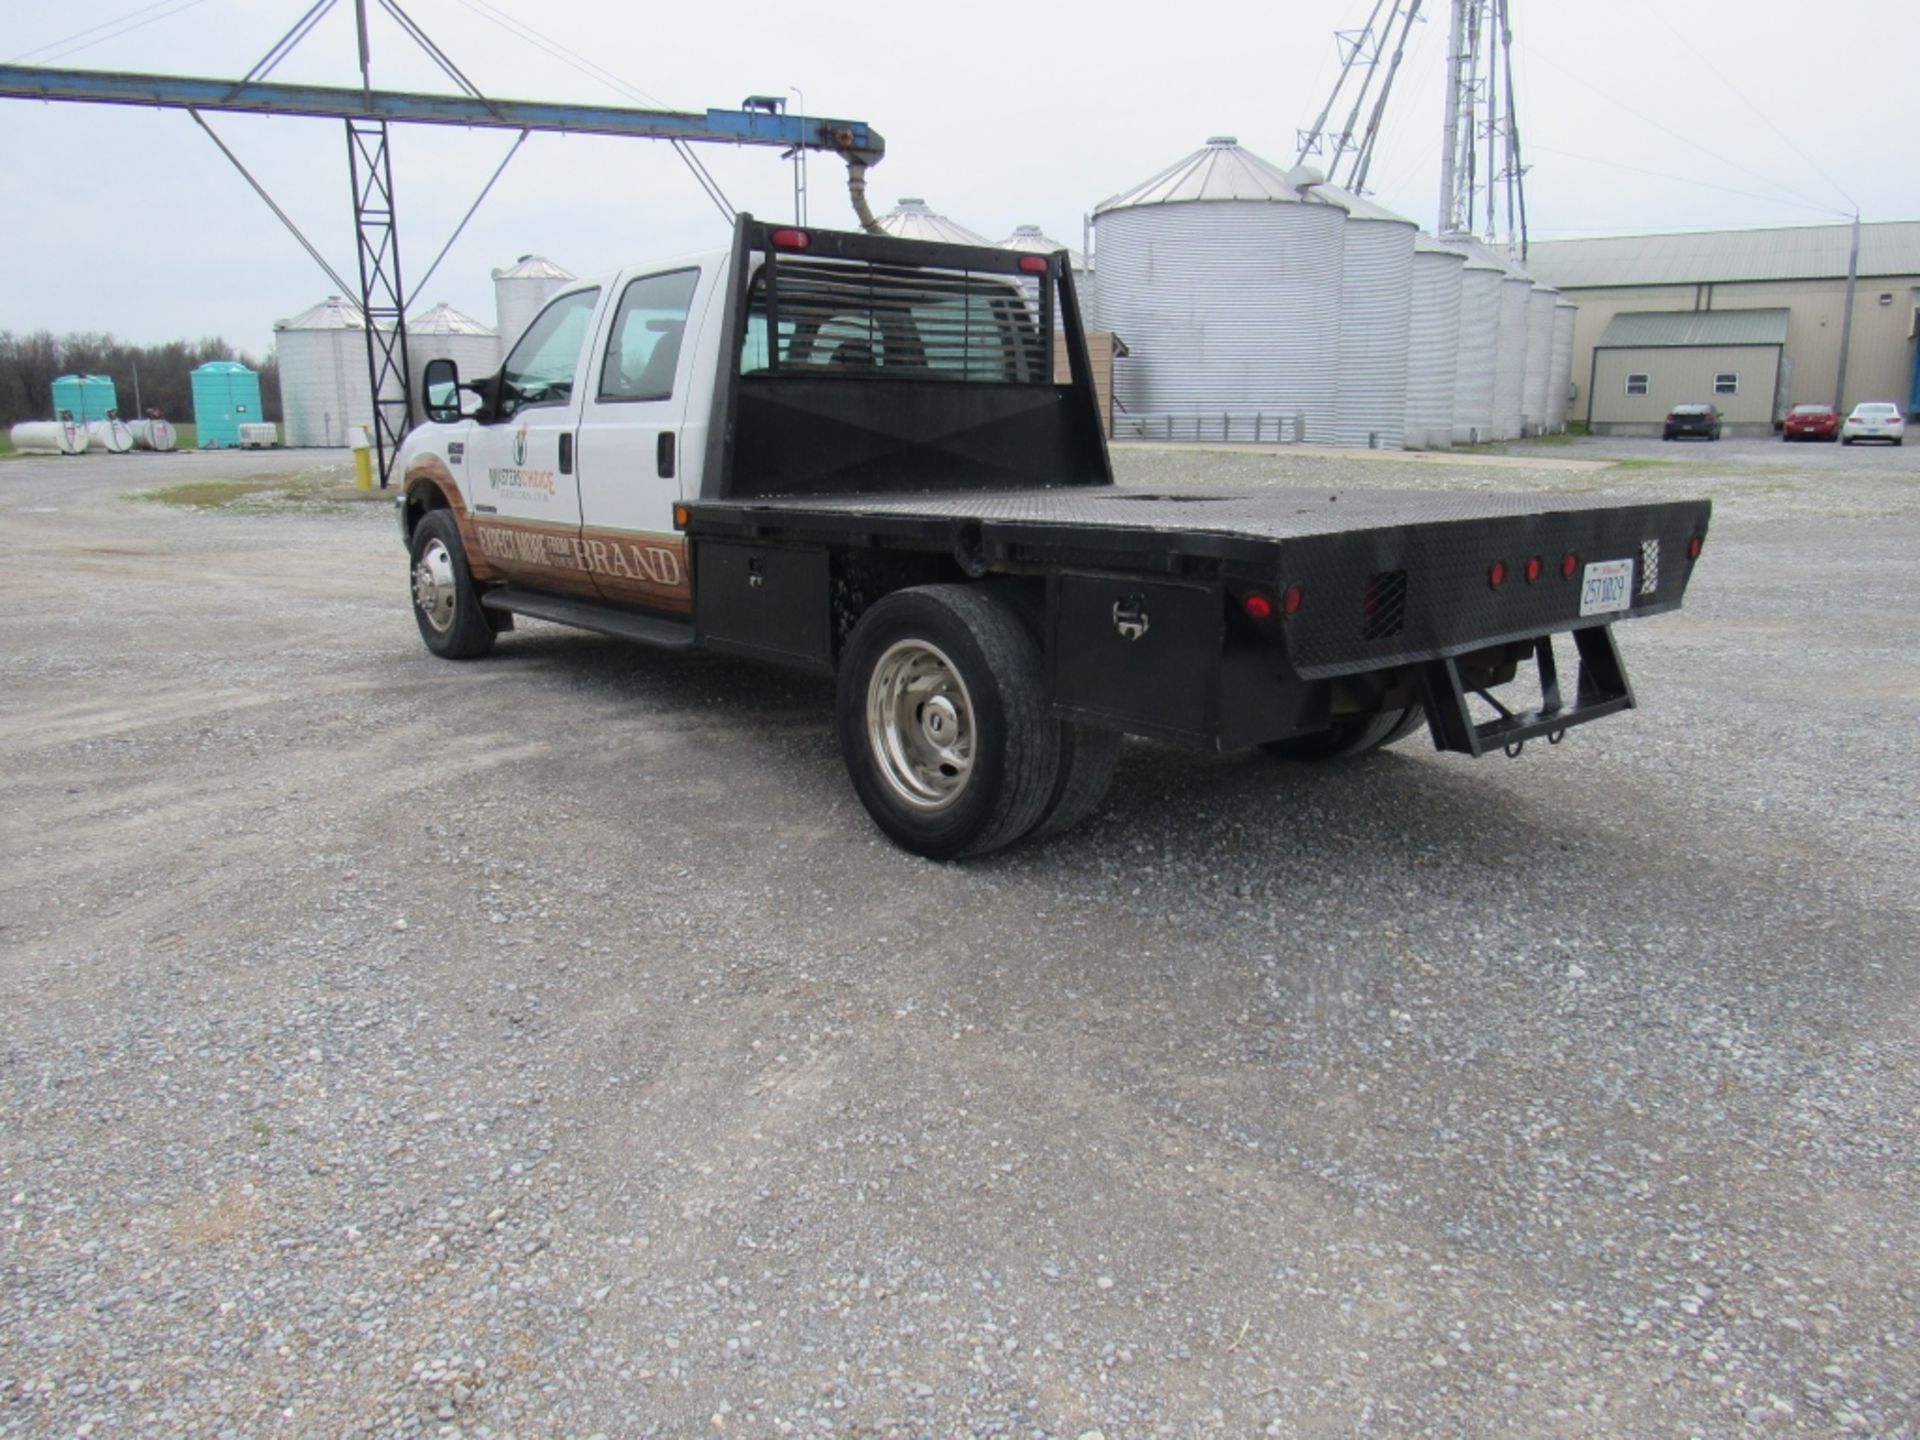 2000 Ford F-450 XLT 2wd 7.3 Powerstroke Diesel Engine - Image 8 of 23